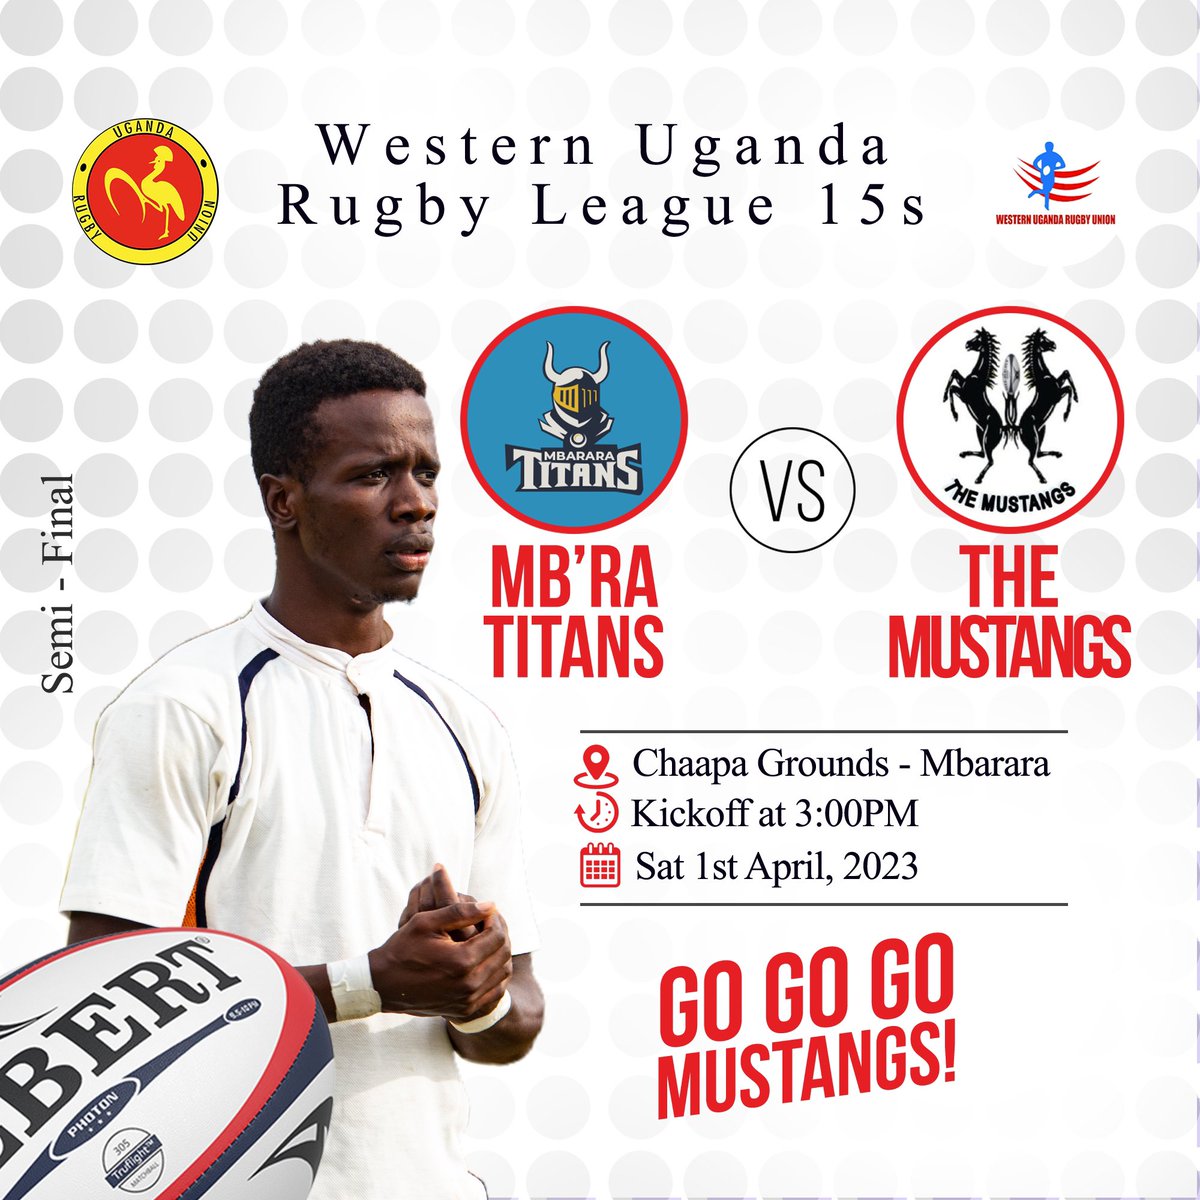 Get ready for an action-packed weekend as we take on Mbarara Titans RFC in the much-awaited derby! 🏉🔥 

#MbararaDerby 
#RugbyFever 
#WeekendVibes
#MUSTangsTuko